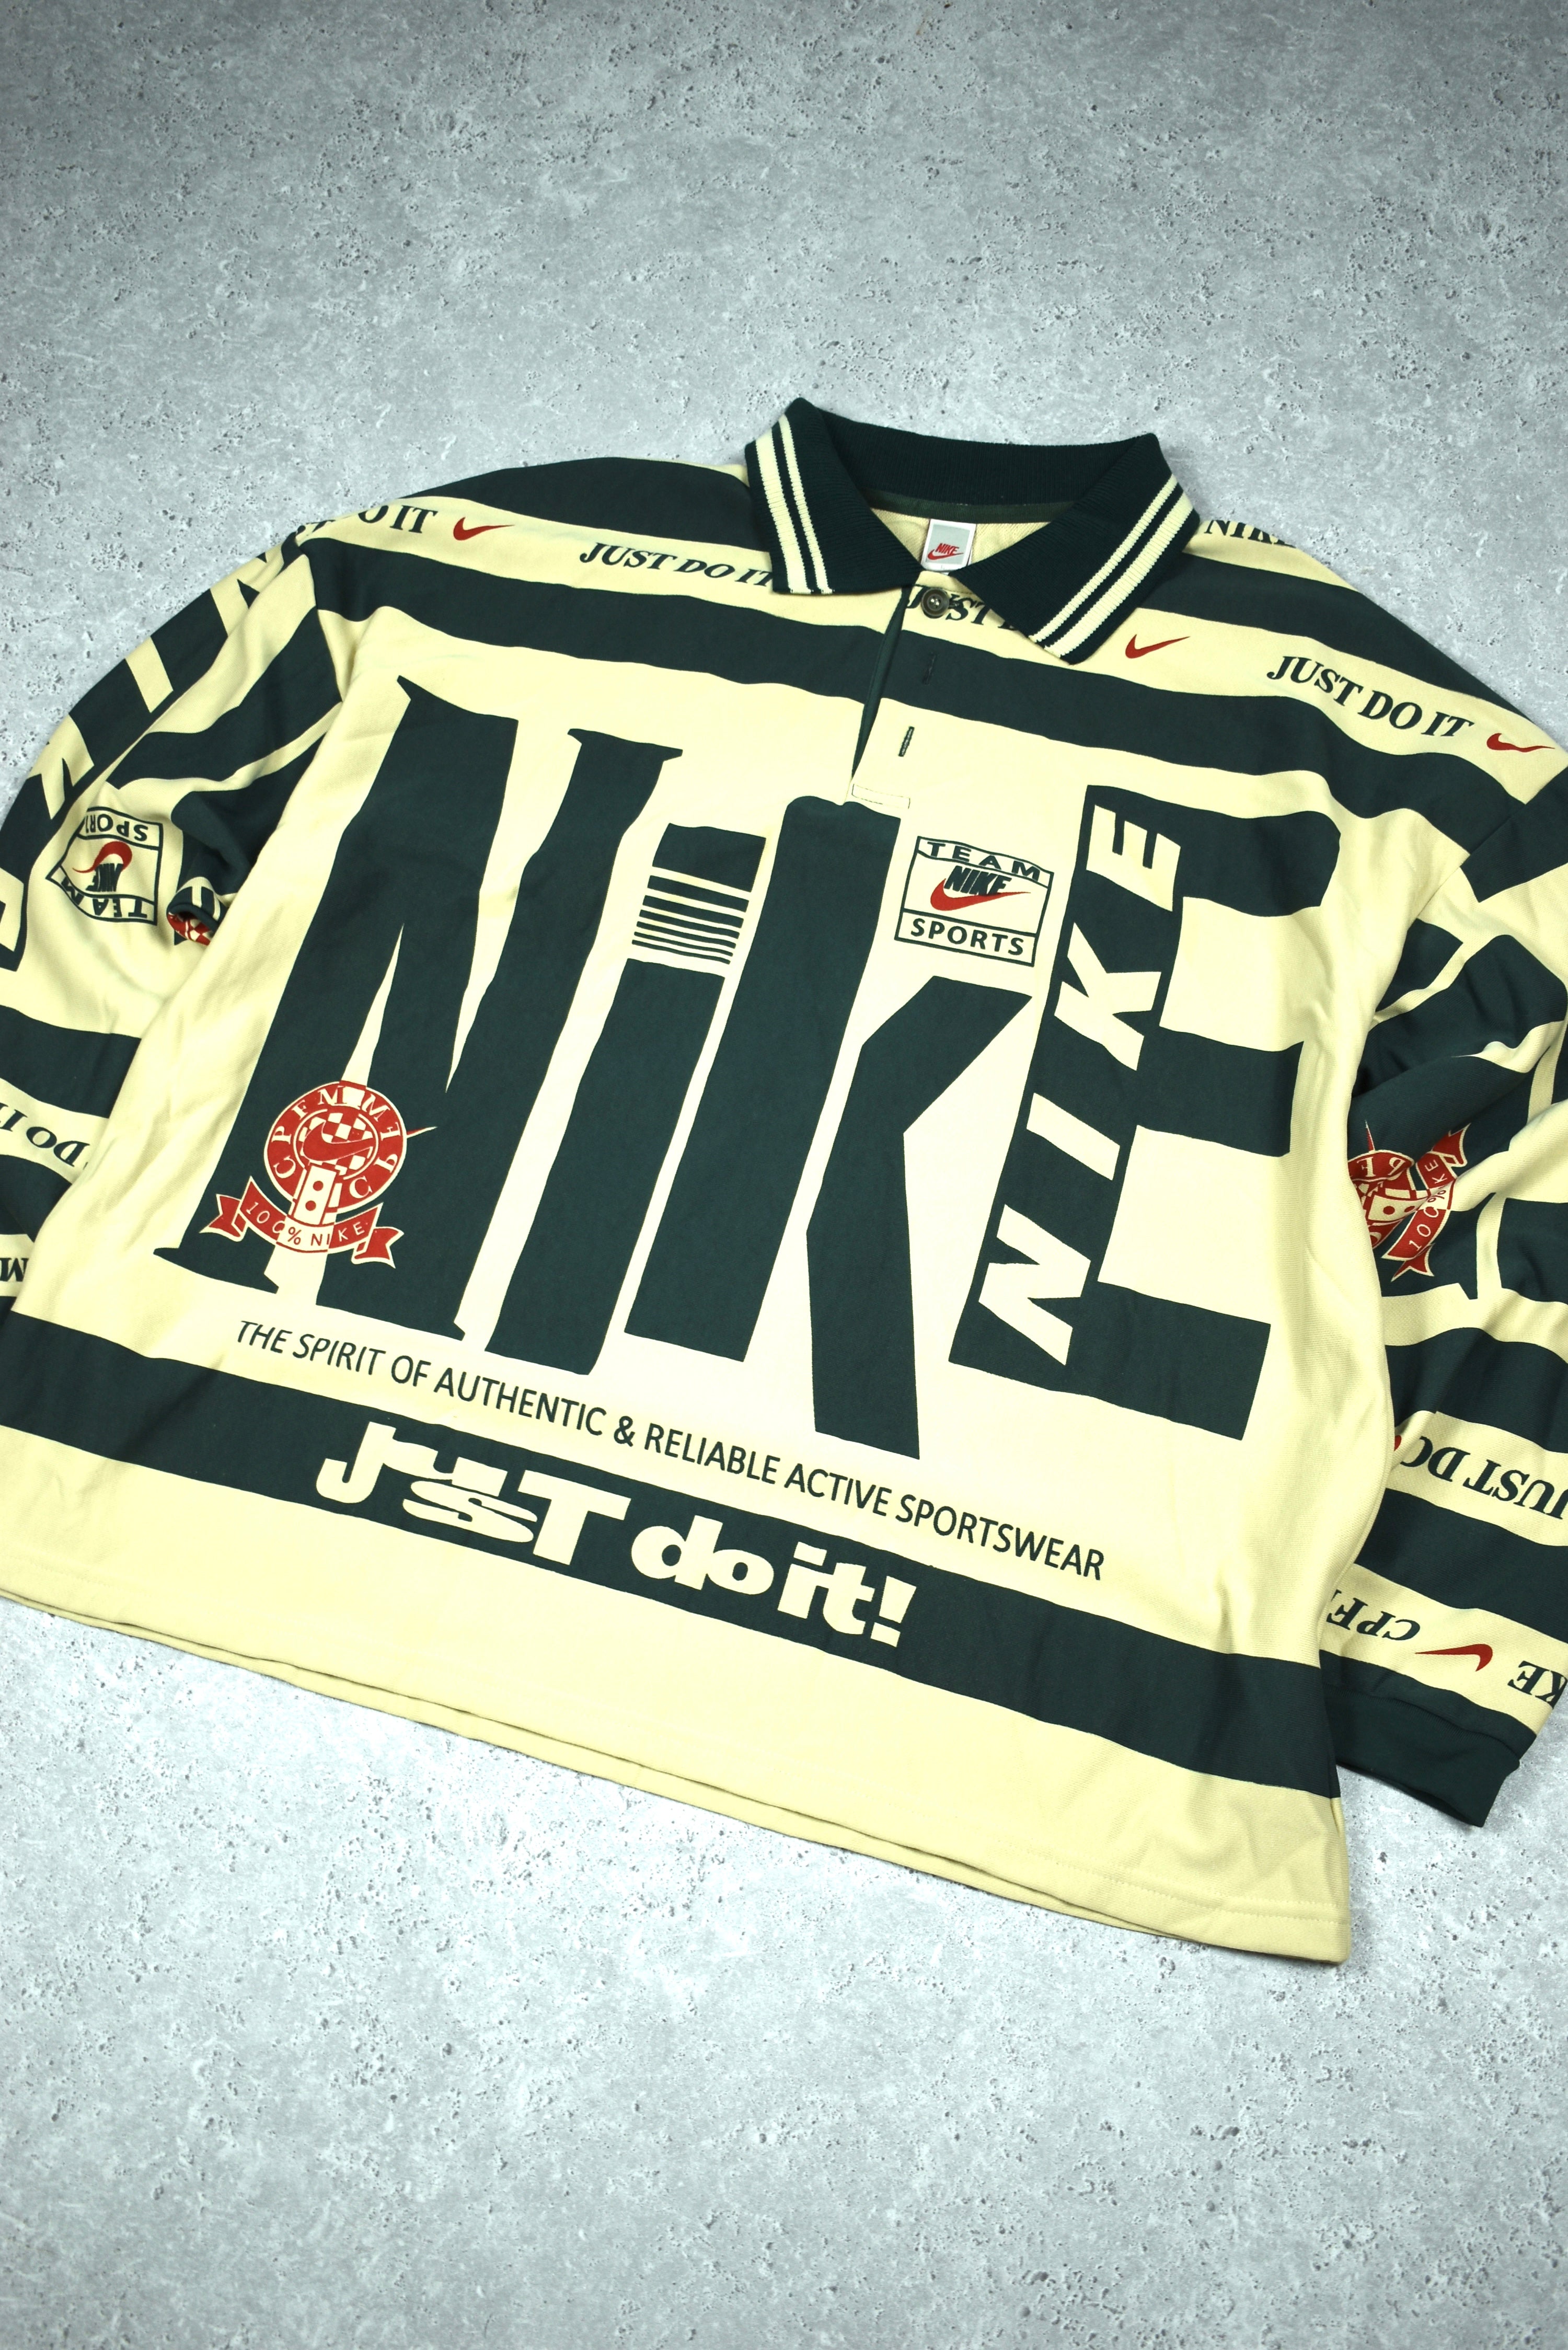 Vintage Rare Grail Nike x CPFM Rugby Shirt Large